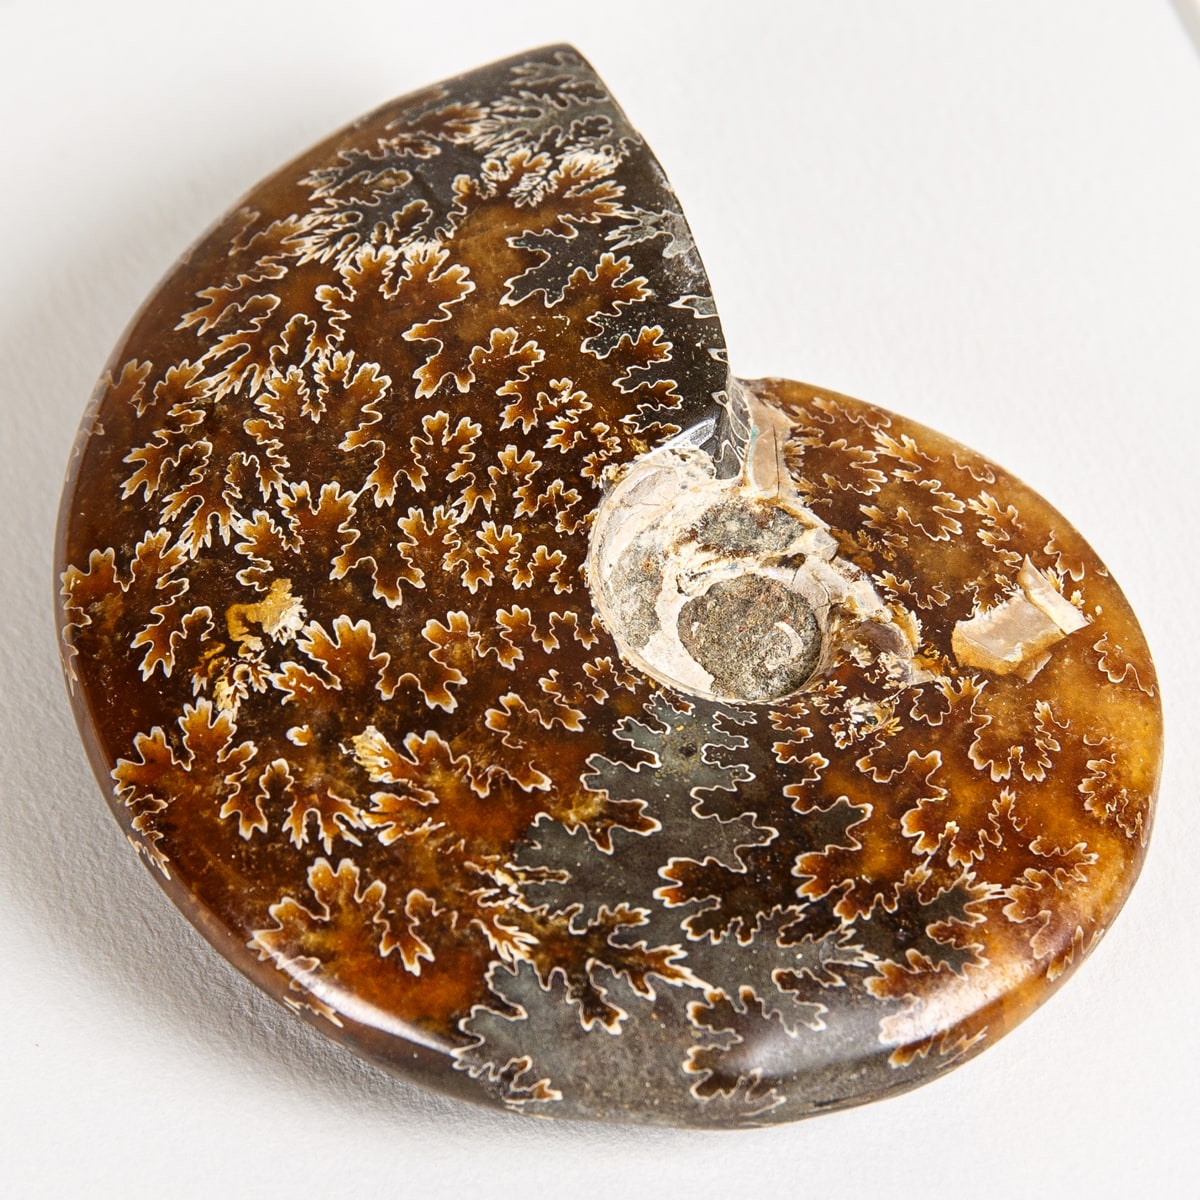 Whole Polished Ammonite Fossil in Box Frame (Cleoniceras sp)